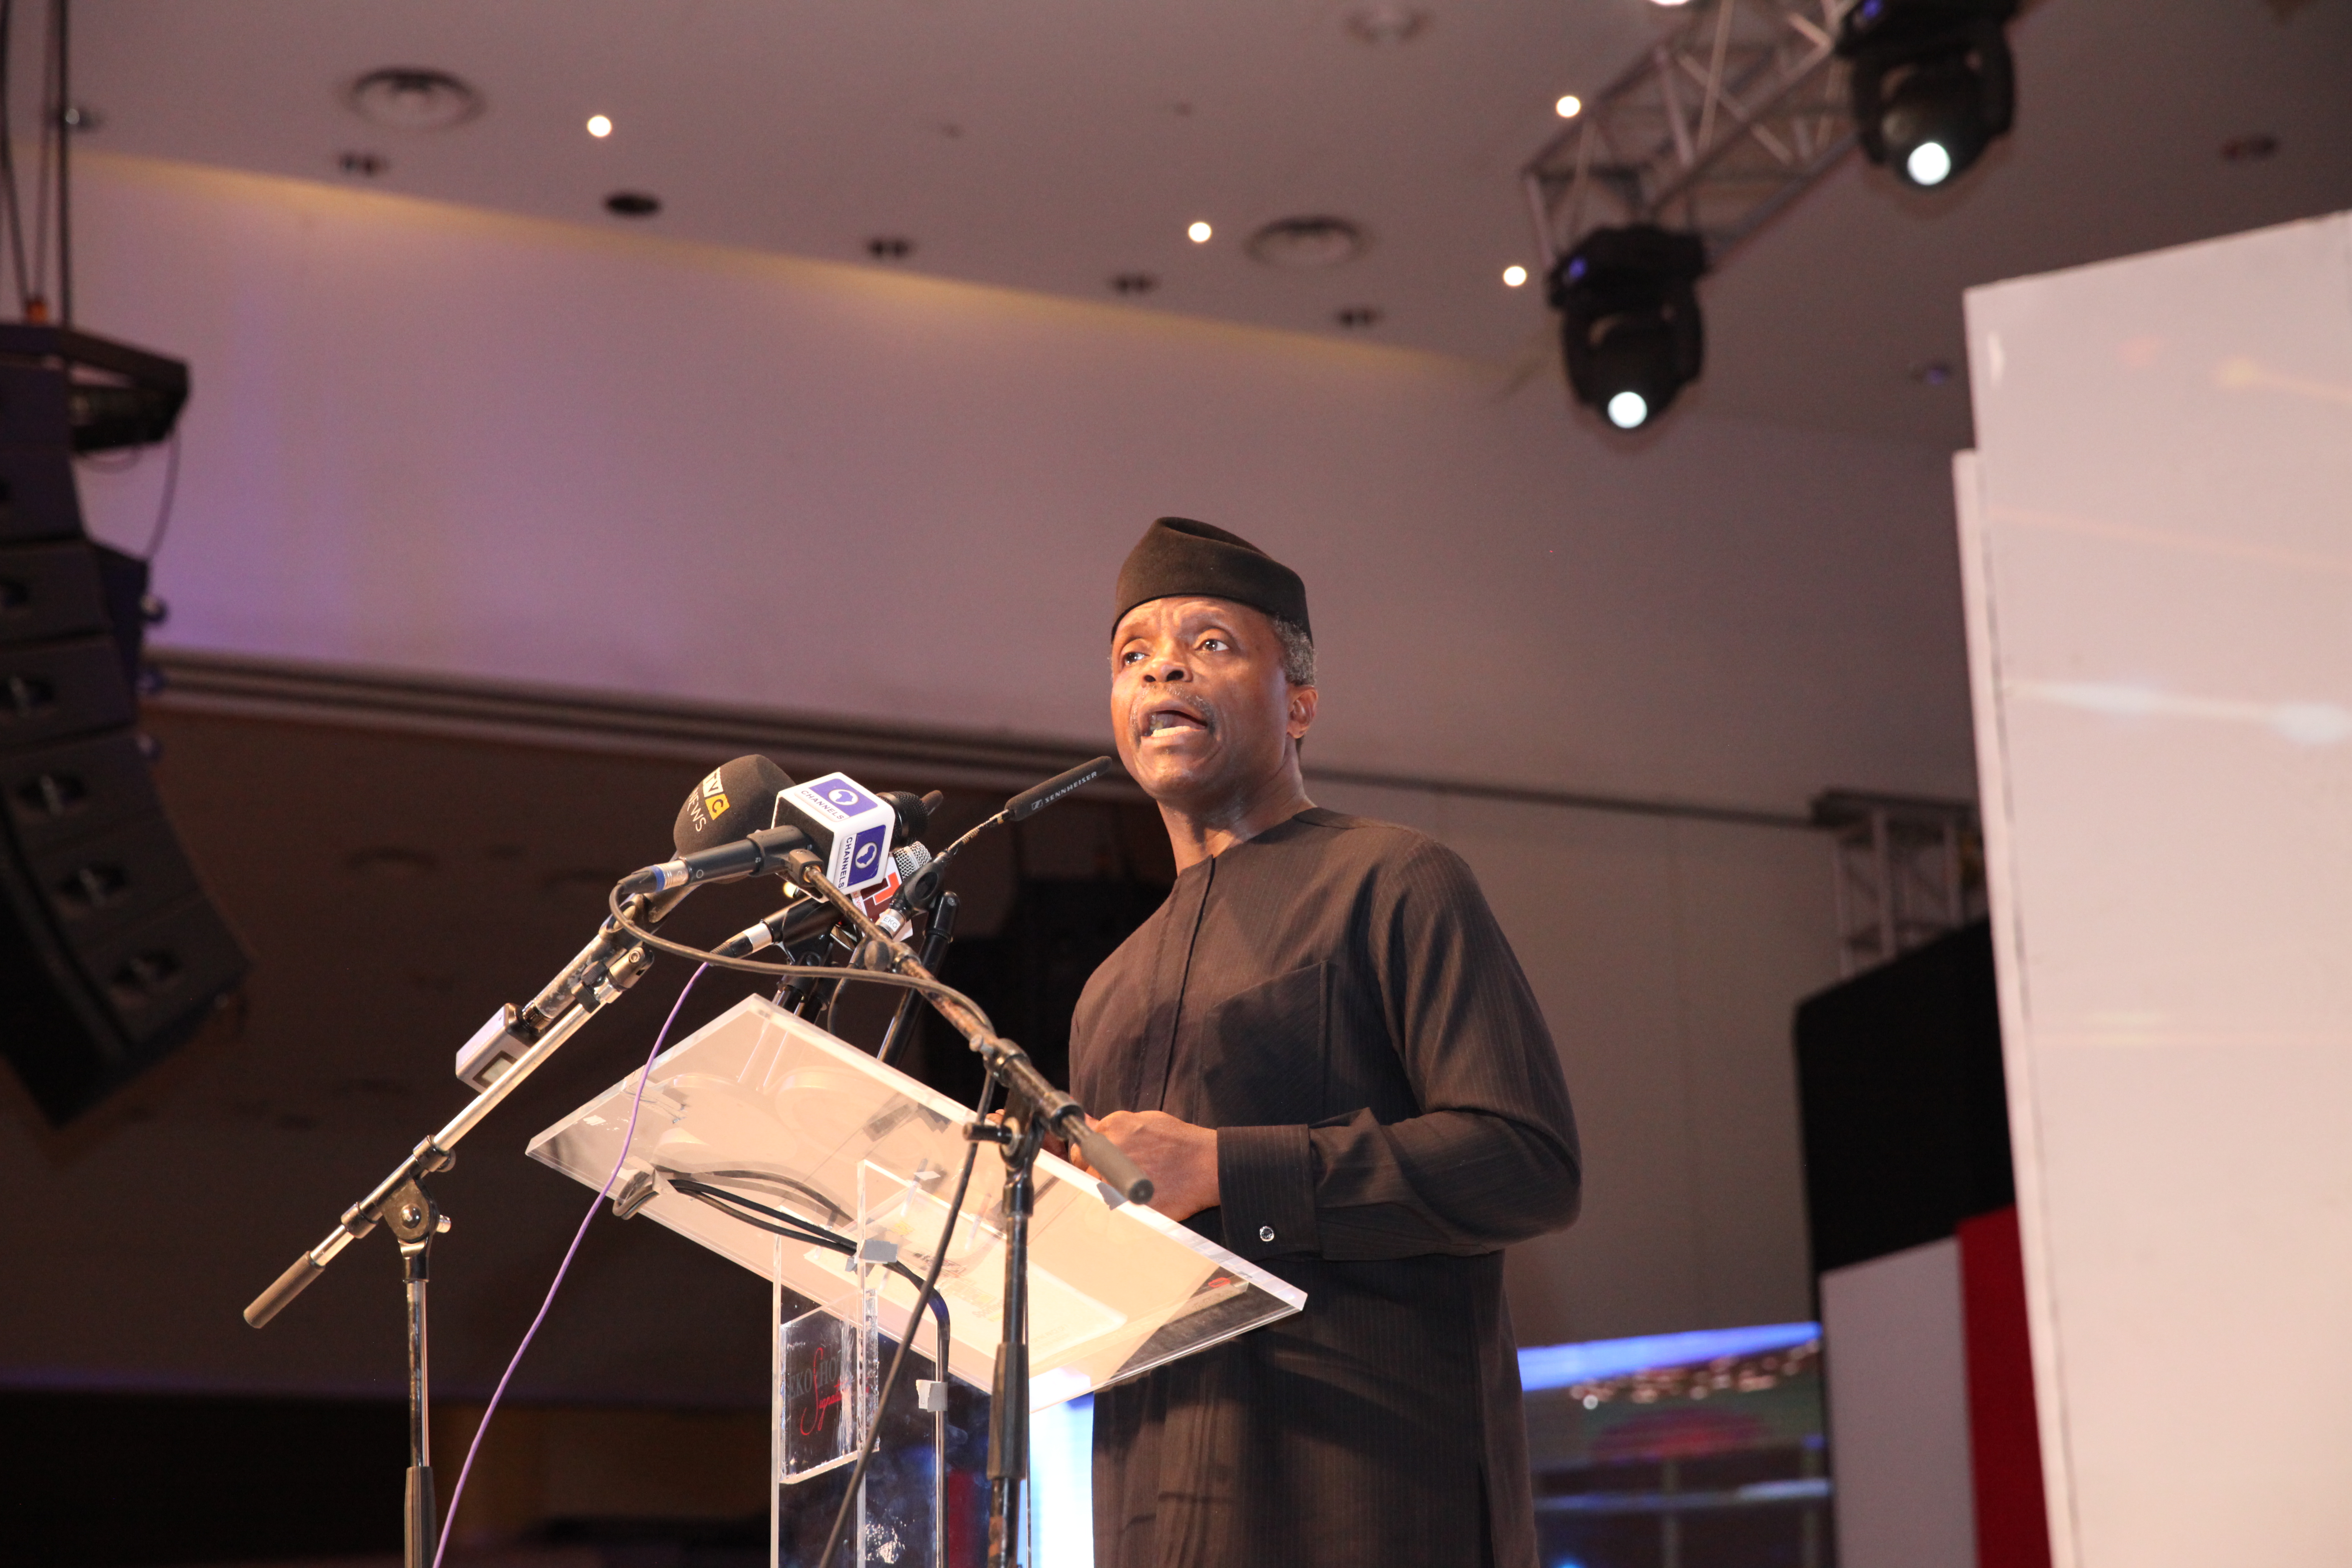 VP Osinbajo Attends “The Sun Man Of The Year Award” Event On 20/02/2016